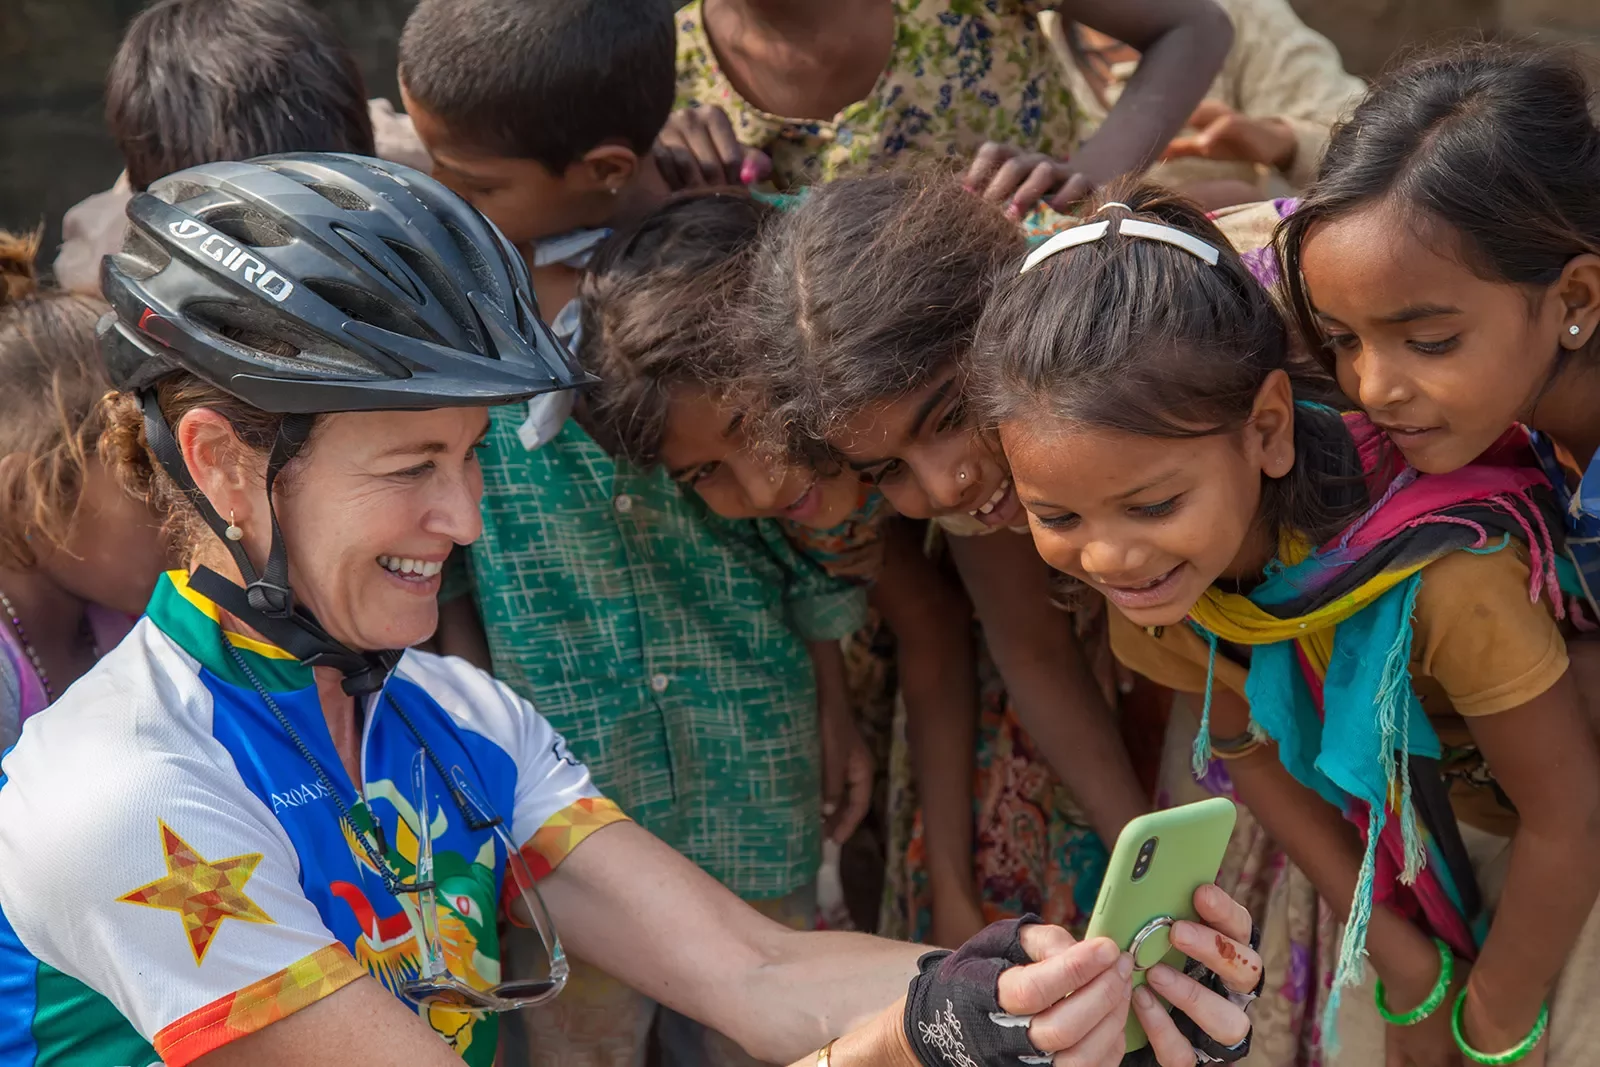 Woman showing her phone to children in India